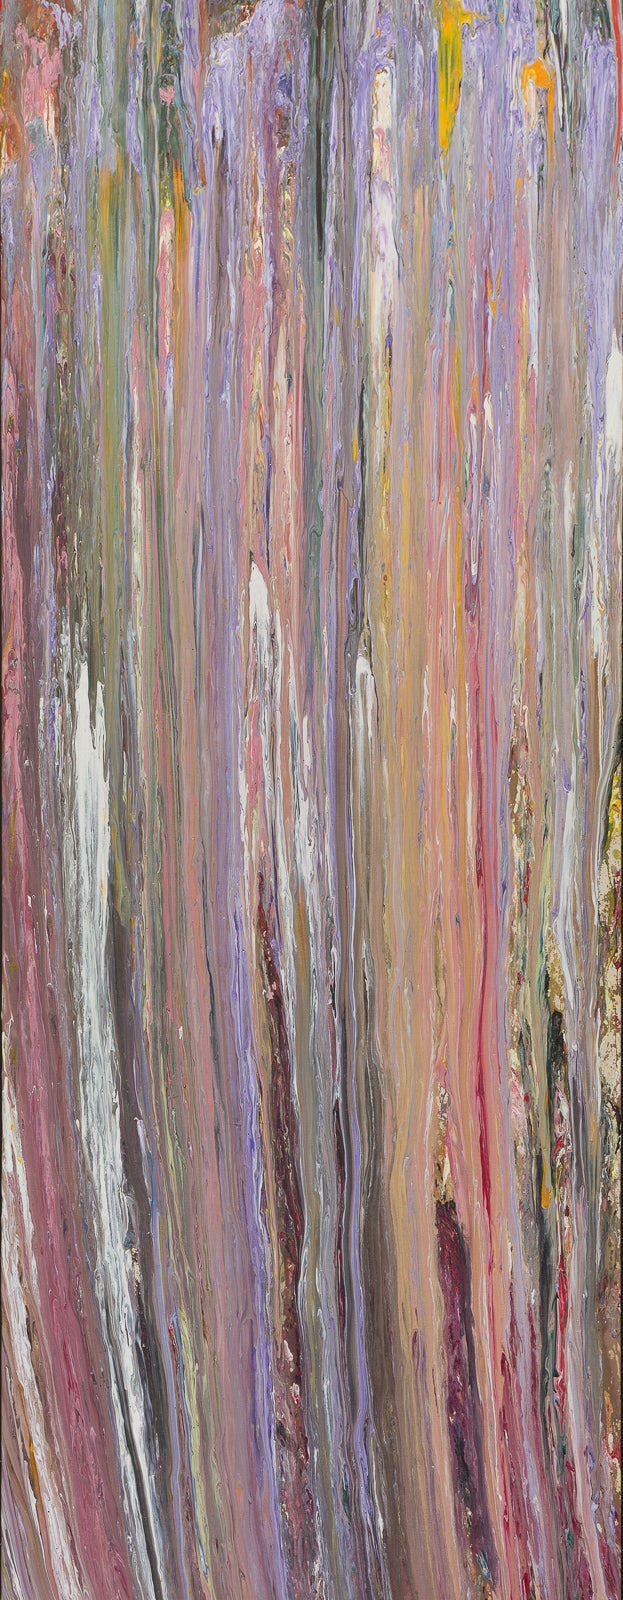 Larry Poons "Untitled," 1975, acrylic on canvas